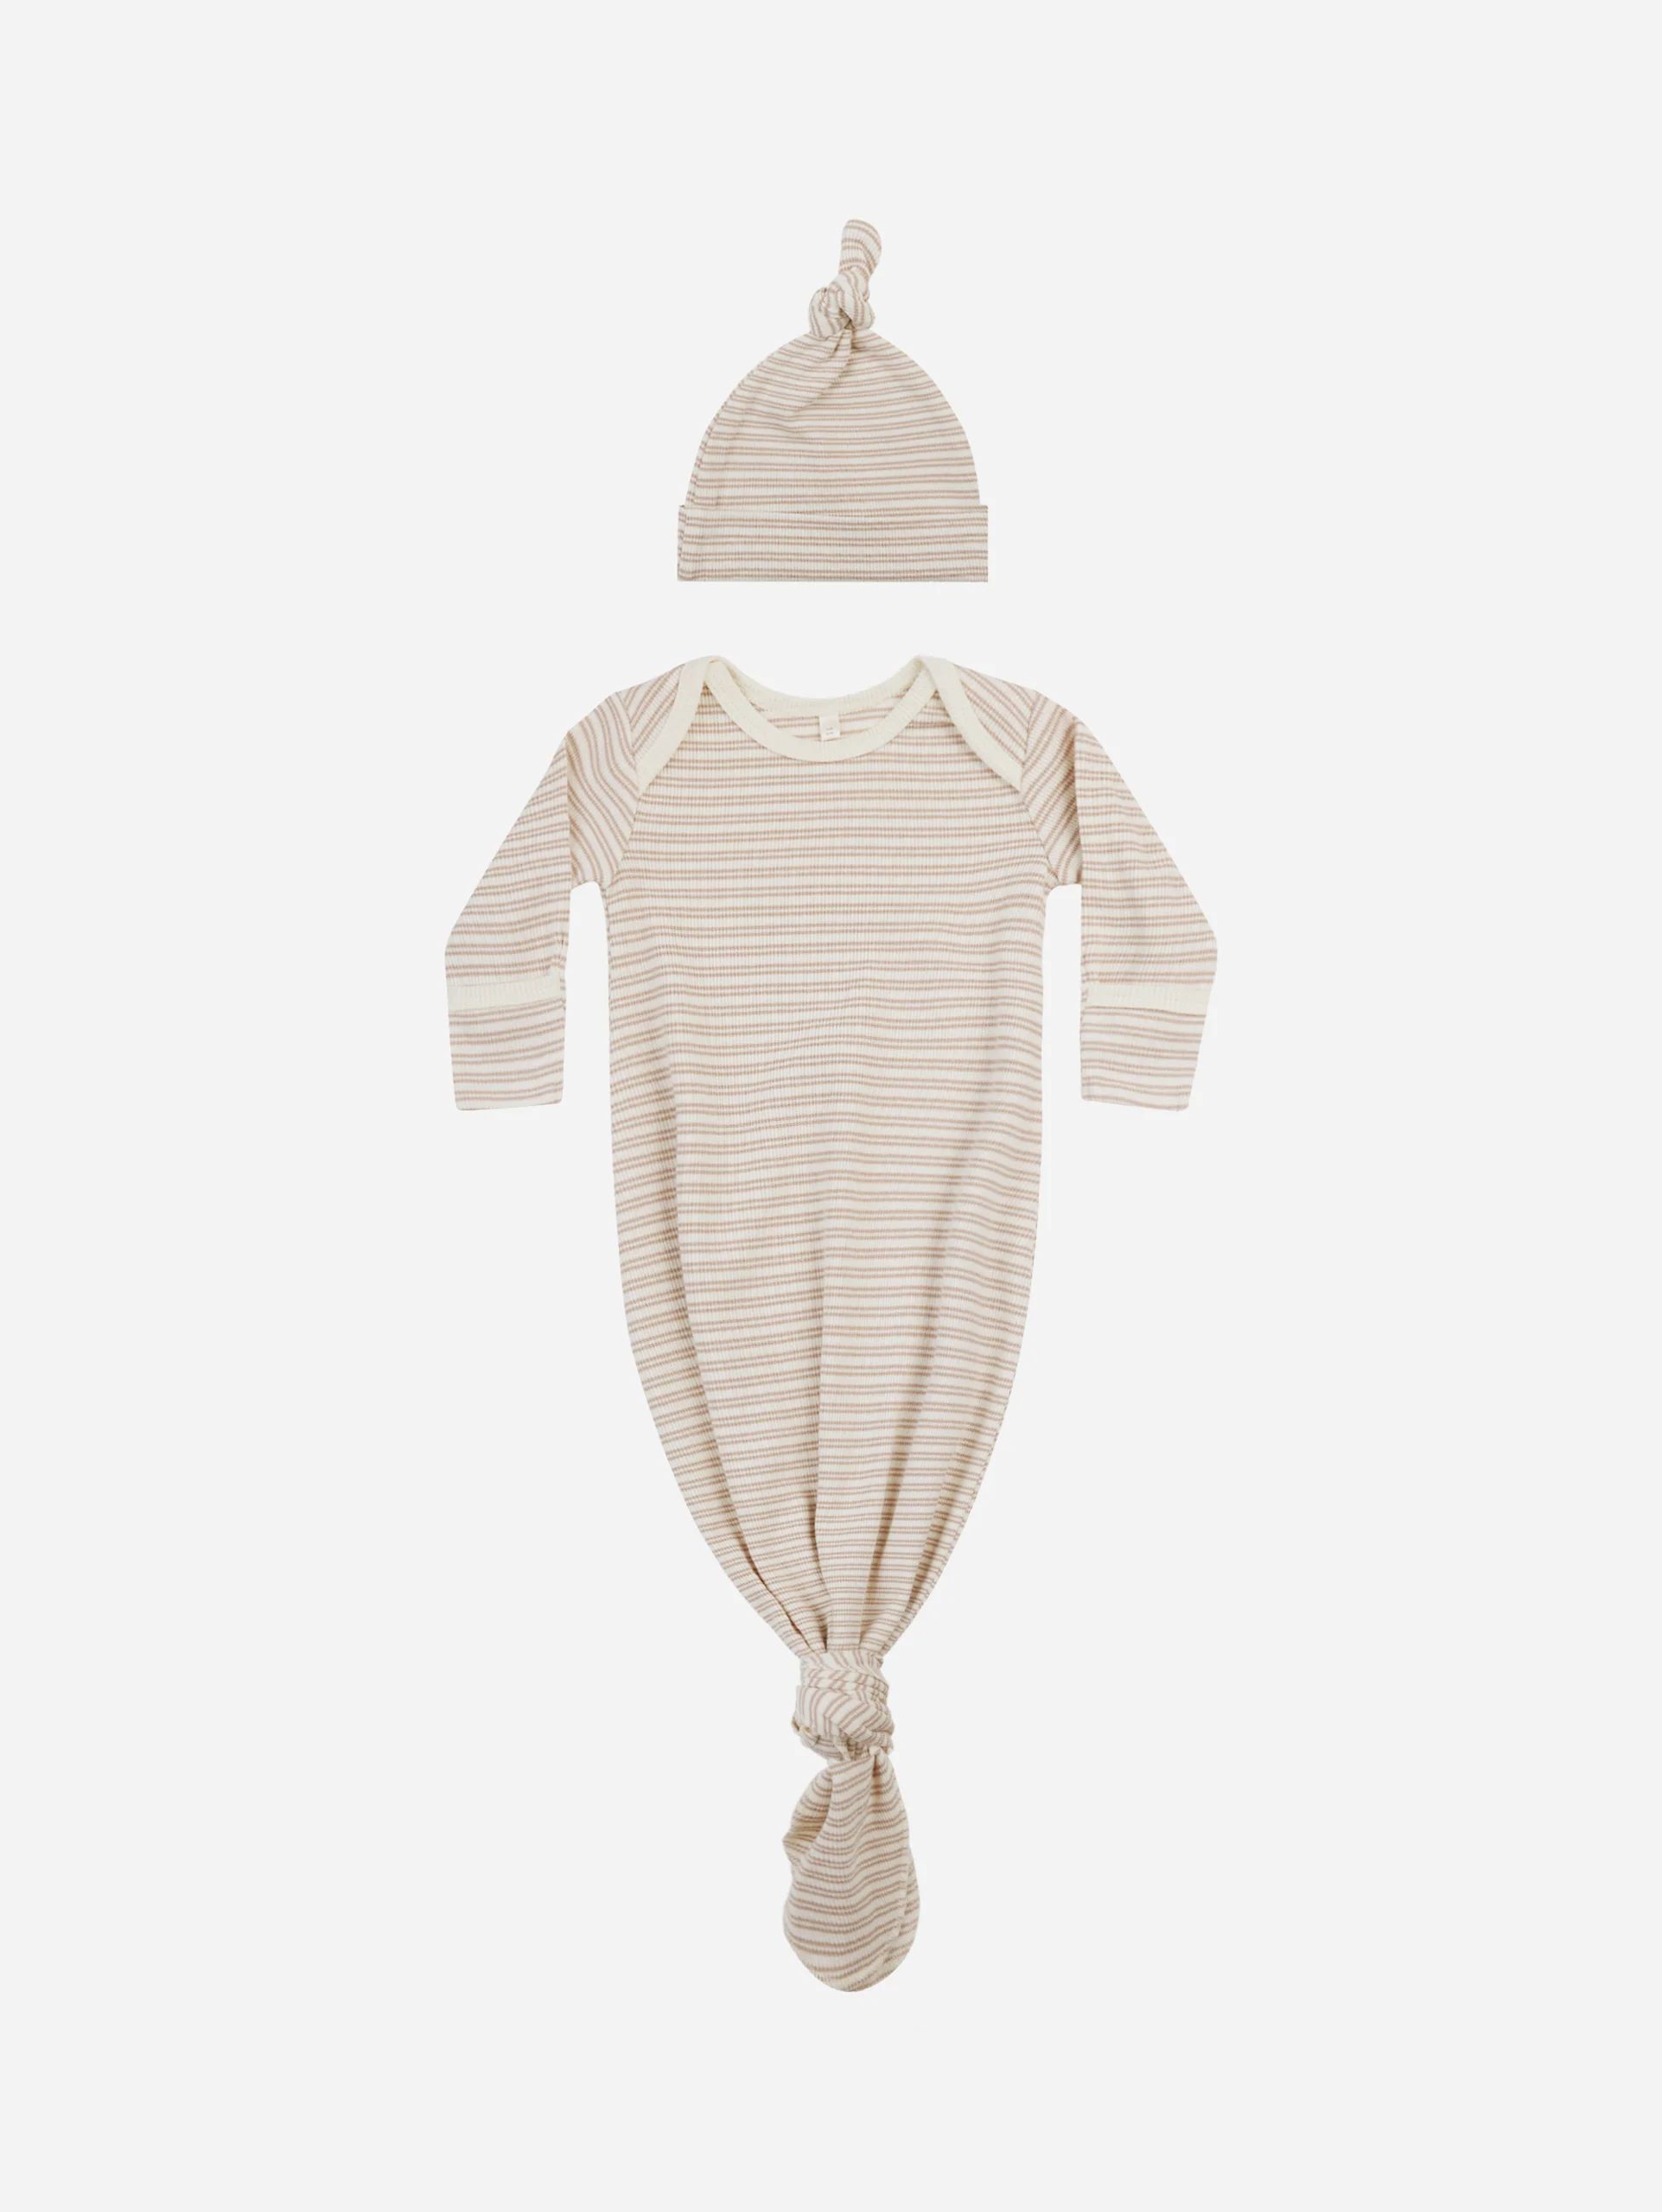 Knotted Baby Gown + Hat Set || Oat Stripe | Rylee + Cru